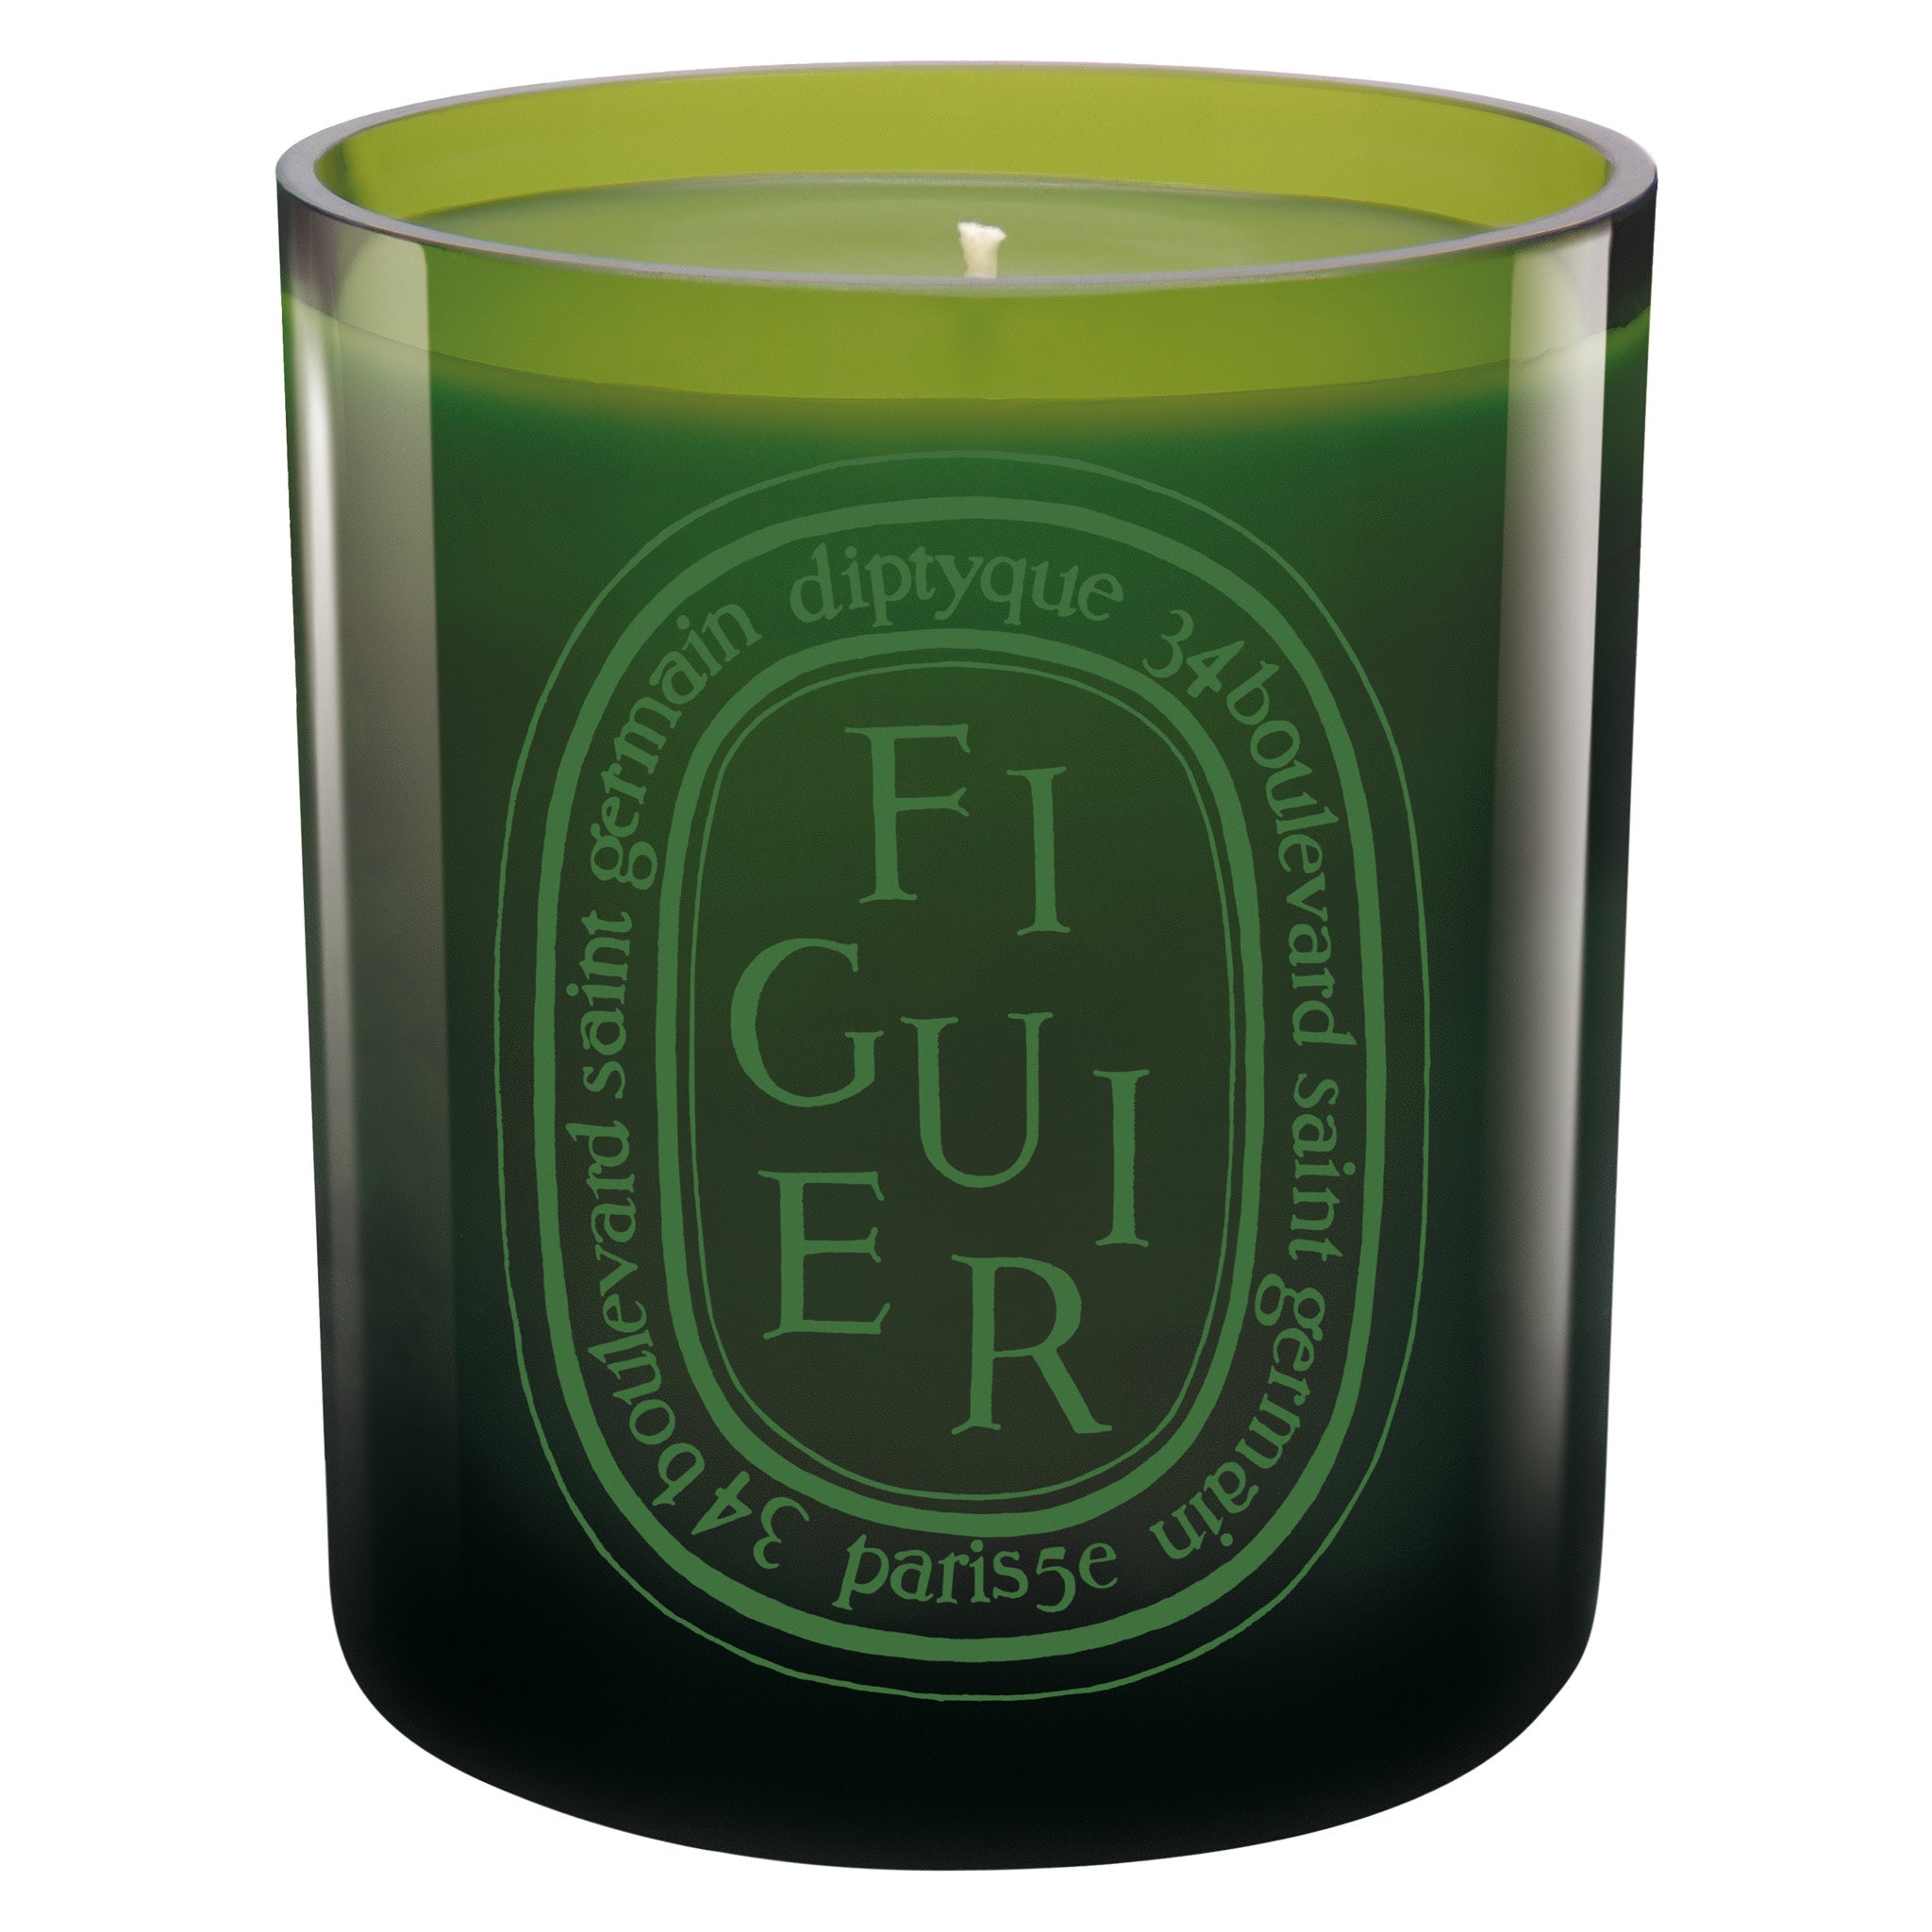 Diptyque Figuier / Fig Tree Verte Candle main image.